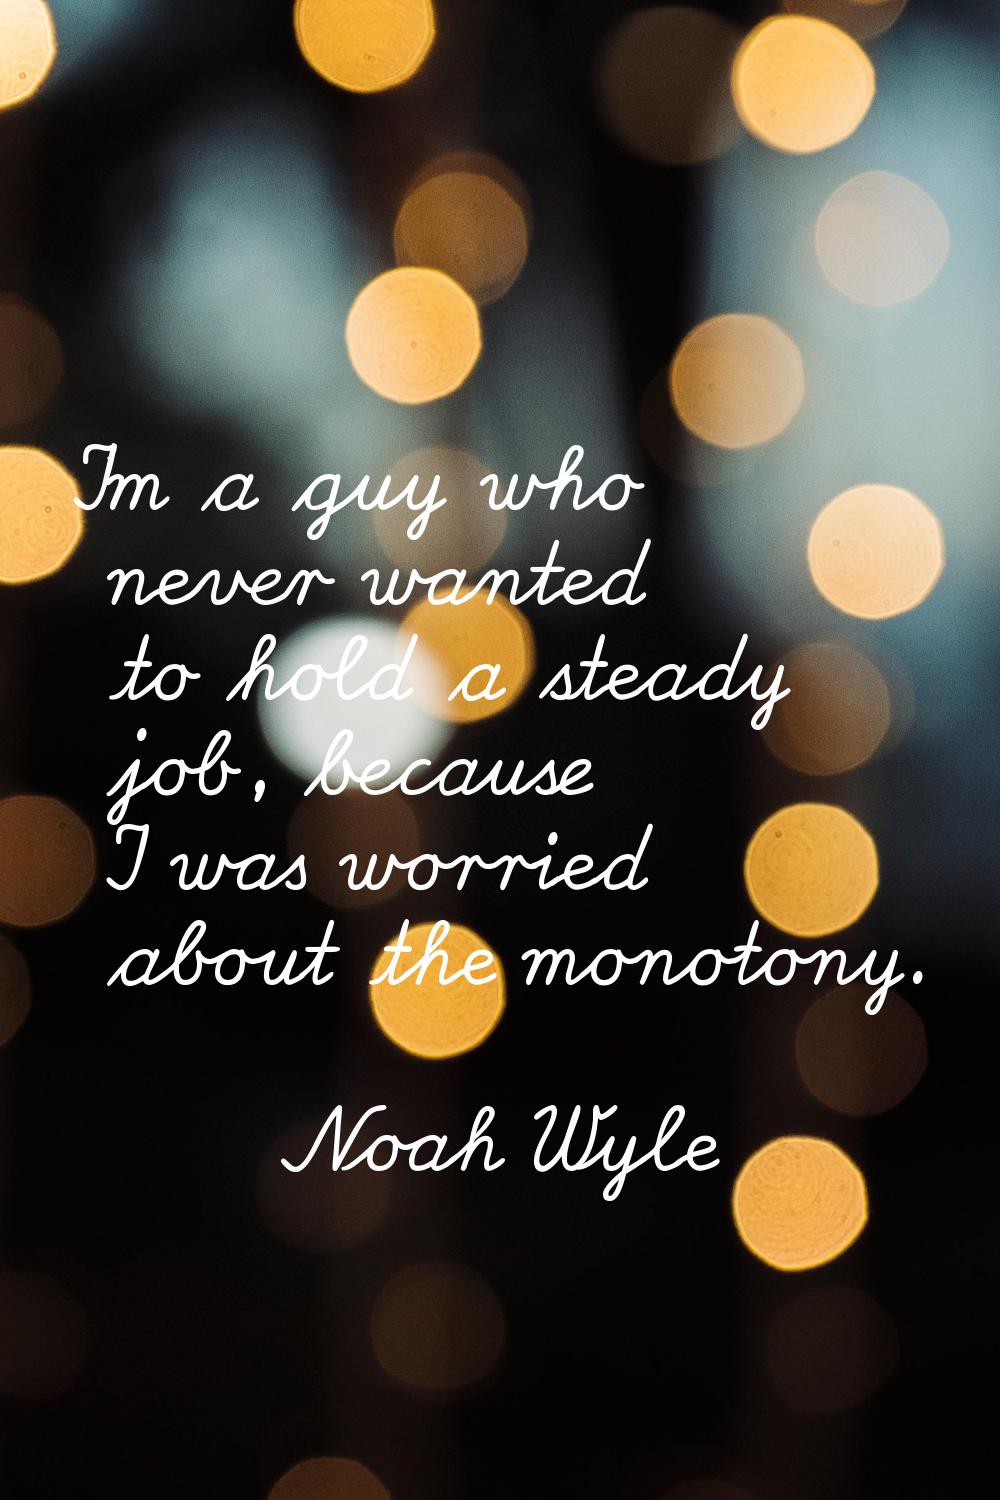 I'm a guy who never wanted to hold a steady job, because I was worried about the monotony.